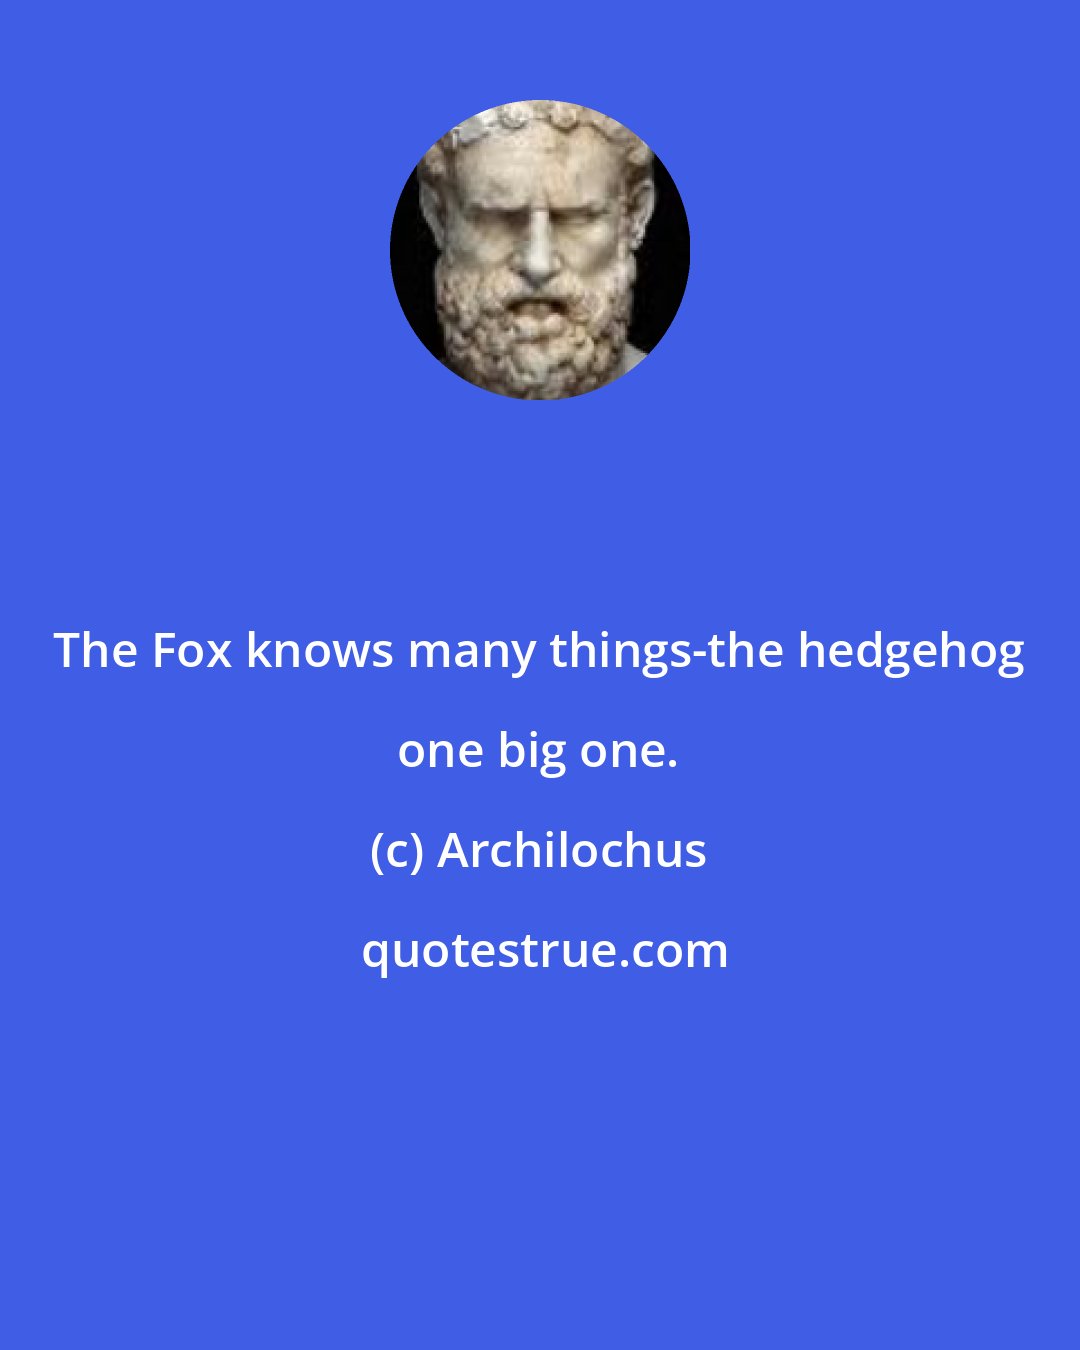 Archilochus: The Fox knows many things-the hedgehog one big one.